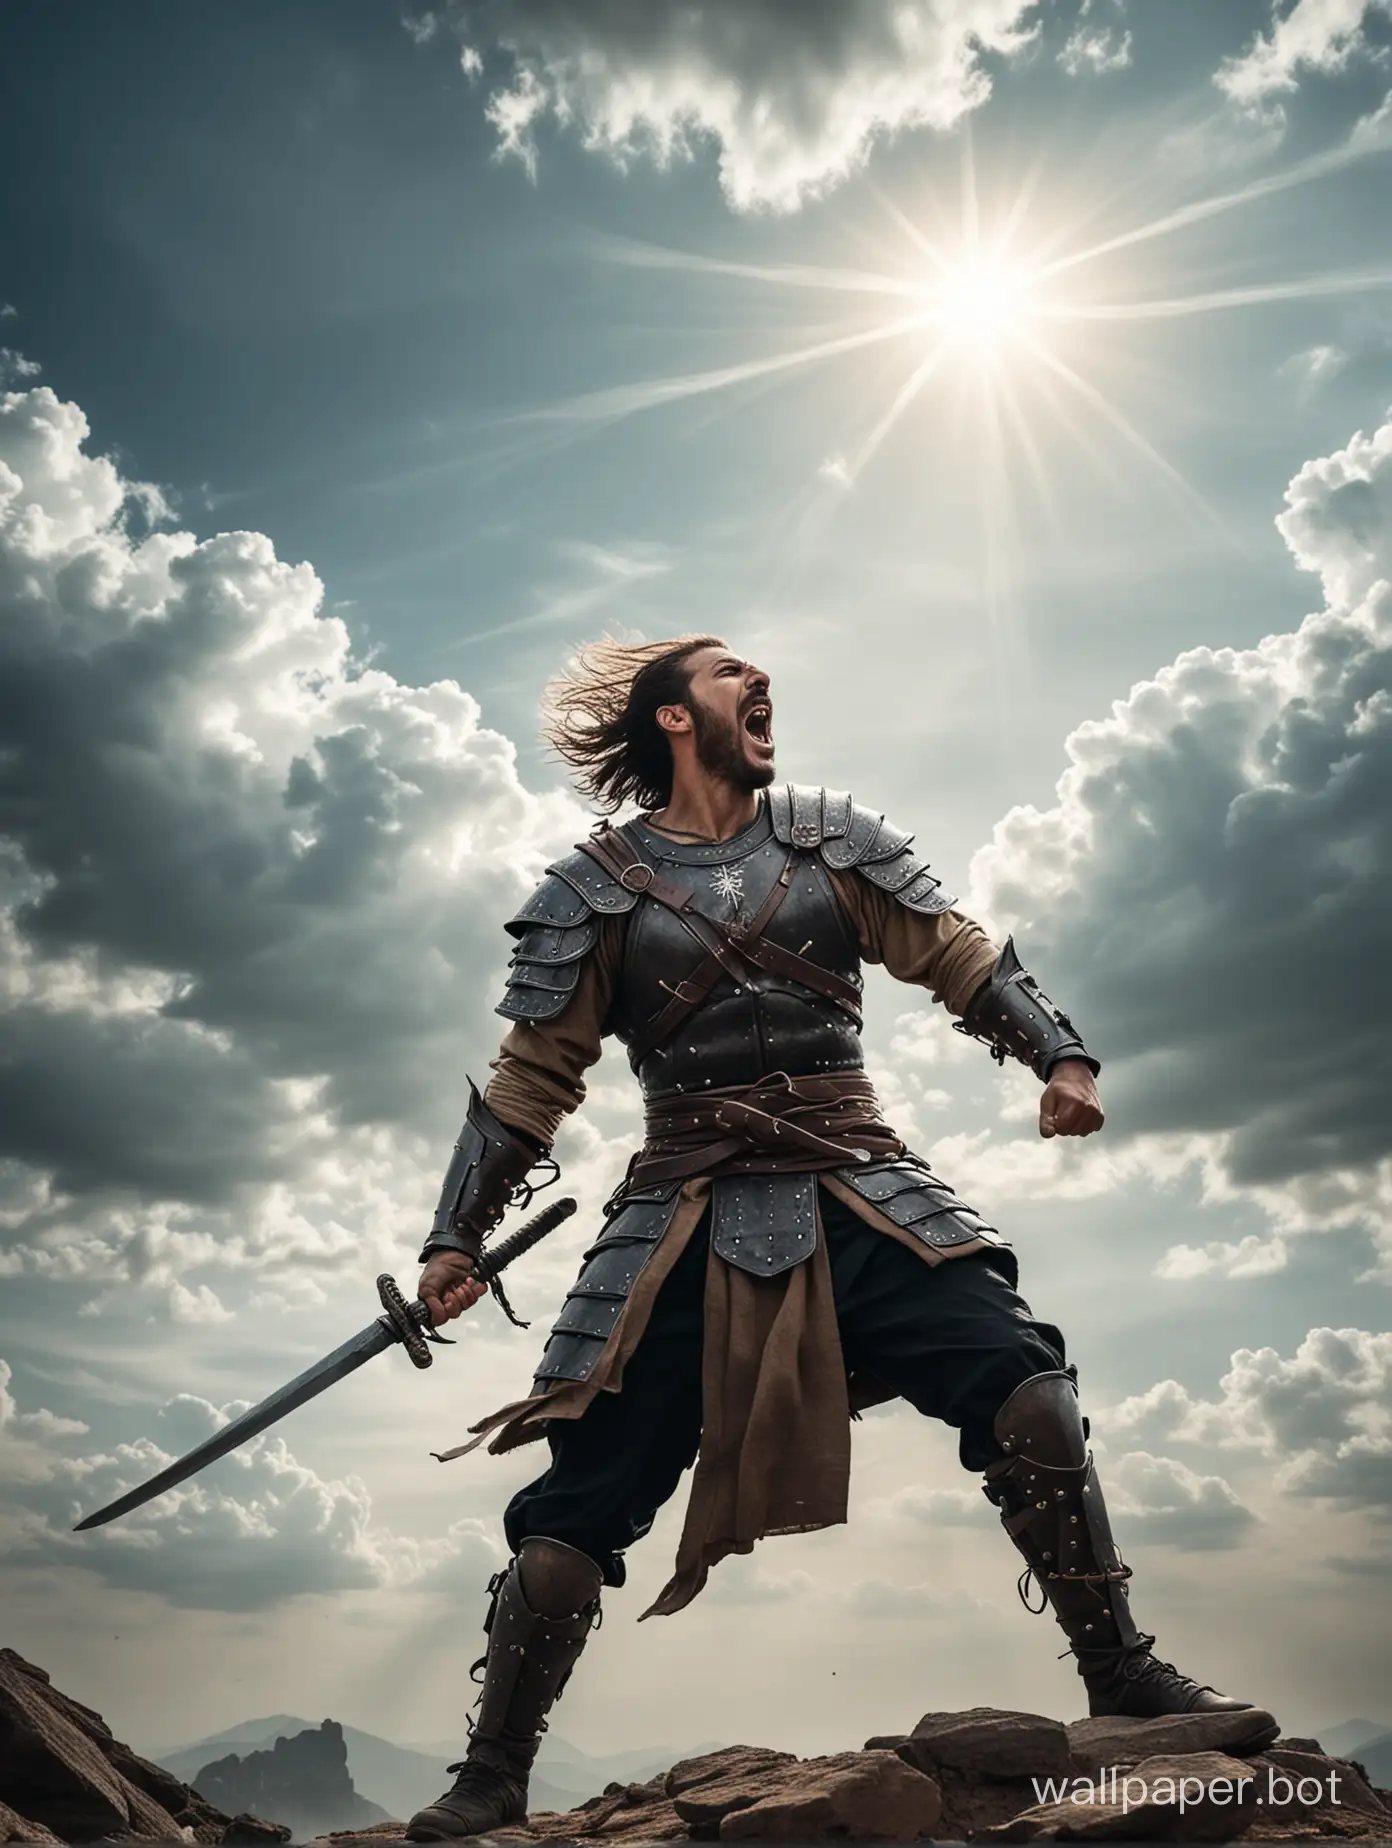 A warrior fighting with two swords and shouting while looking towards sky.